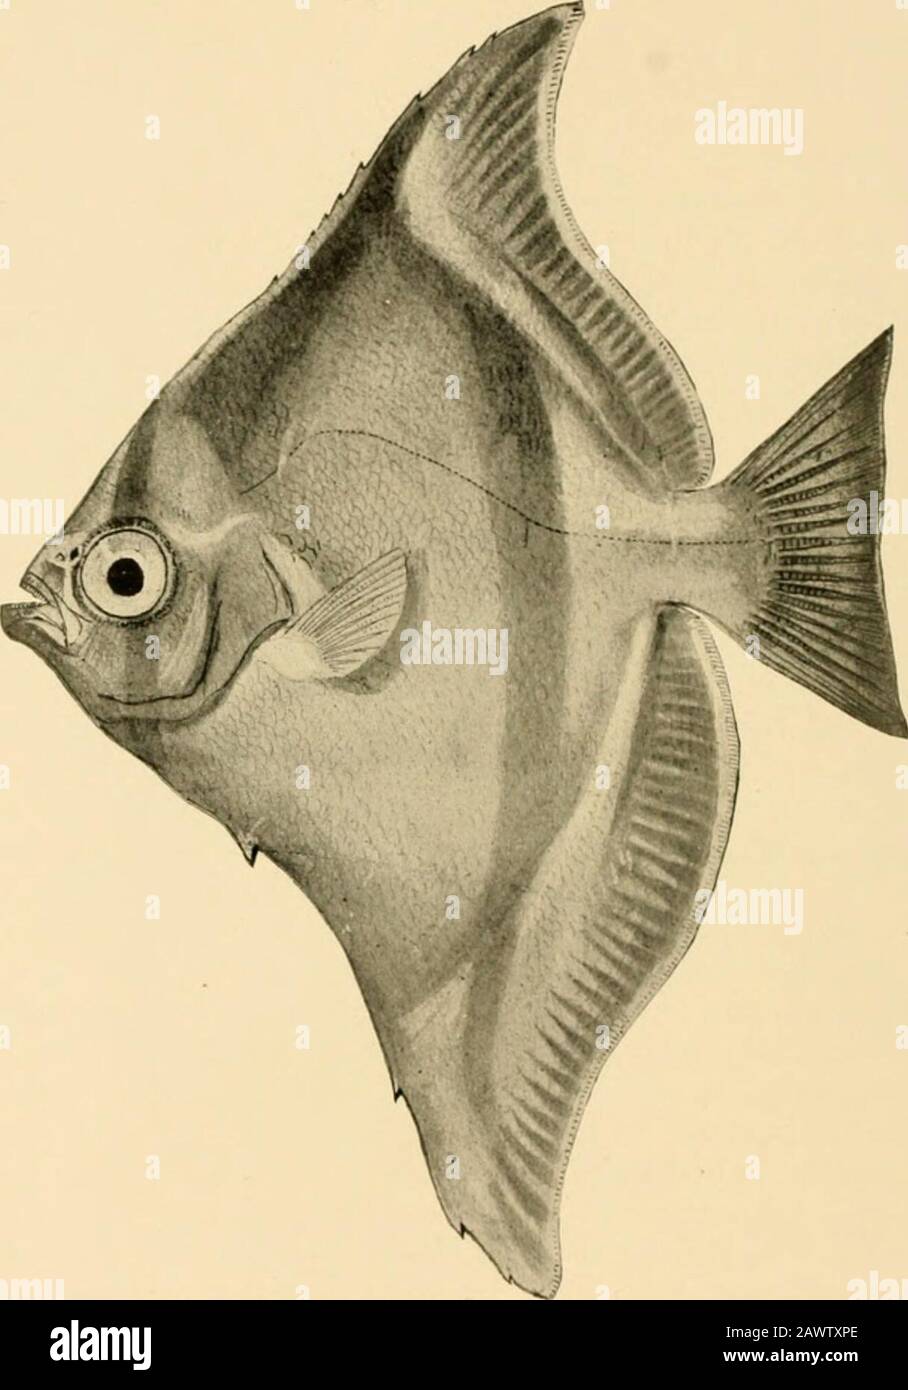 Fishes . not brush-like, and thepost-temporal is free from the skull as in perch-like fishes. Thespecies inhabit the Pacific. Scorpis georgianus is a food-fish ofAustralia, with the body oblong. Monodactylus argenteus, thetoto of Samoa, is almost orbicular in form, while Psettias seba istwice as deep as long, the deepest-bodied of all fishes in propor-tion to its length. The Boarfishes: Antigoniidae.—The boarfishes (AntigoniidcB) arecharacterized by a very deep body covered with rough scales,the post-temporal, as in the Chcctodontidce and the ZeidcB, beingadnate to the skull. These fishes bear Stock Photo